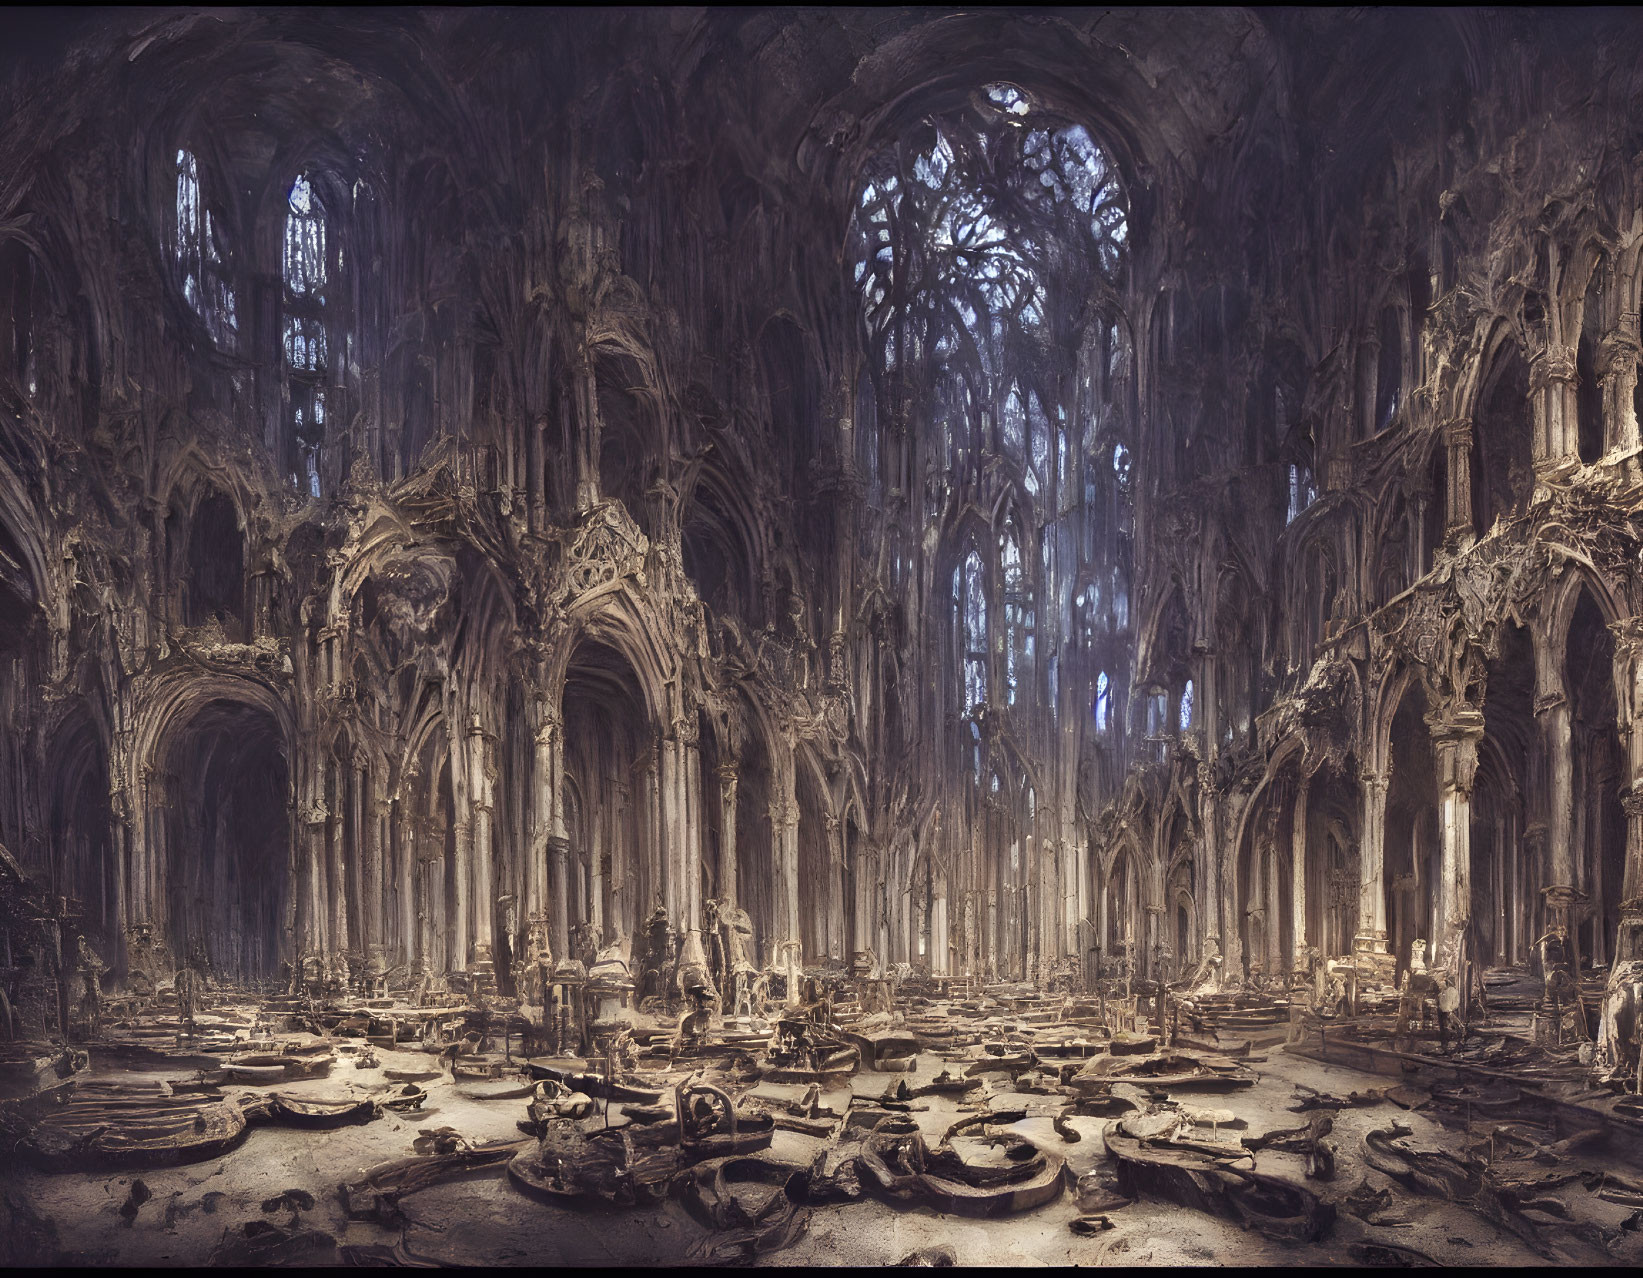 Cathedral of Bones #2